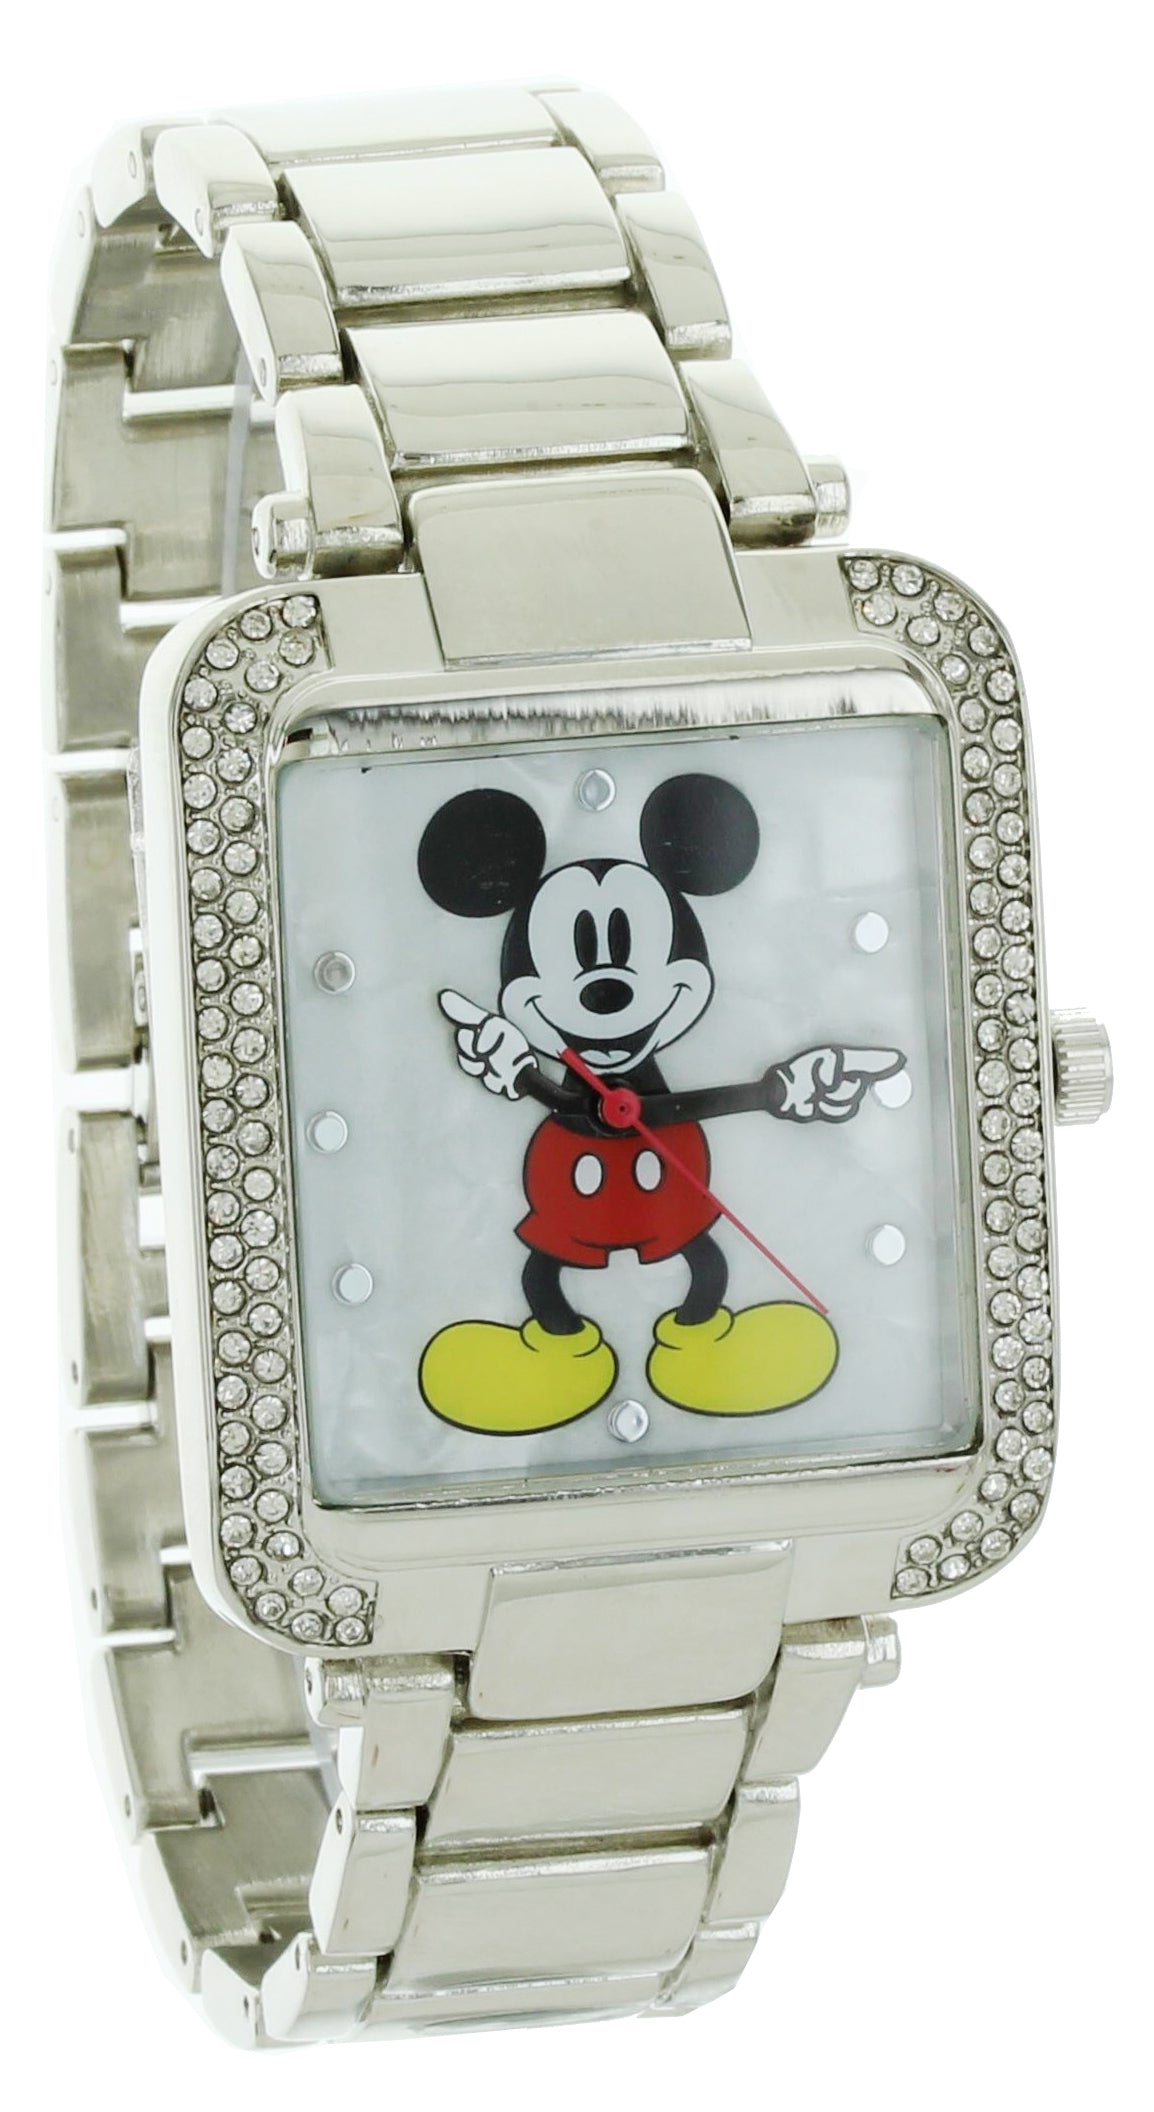 Model: Disney Time Works Mickey Mouse Watch with Square Face and Metal Band with Stone